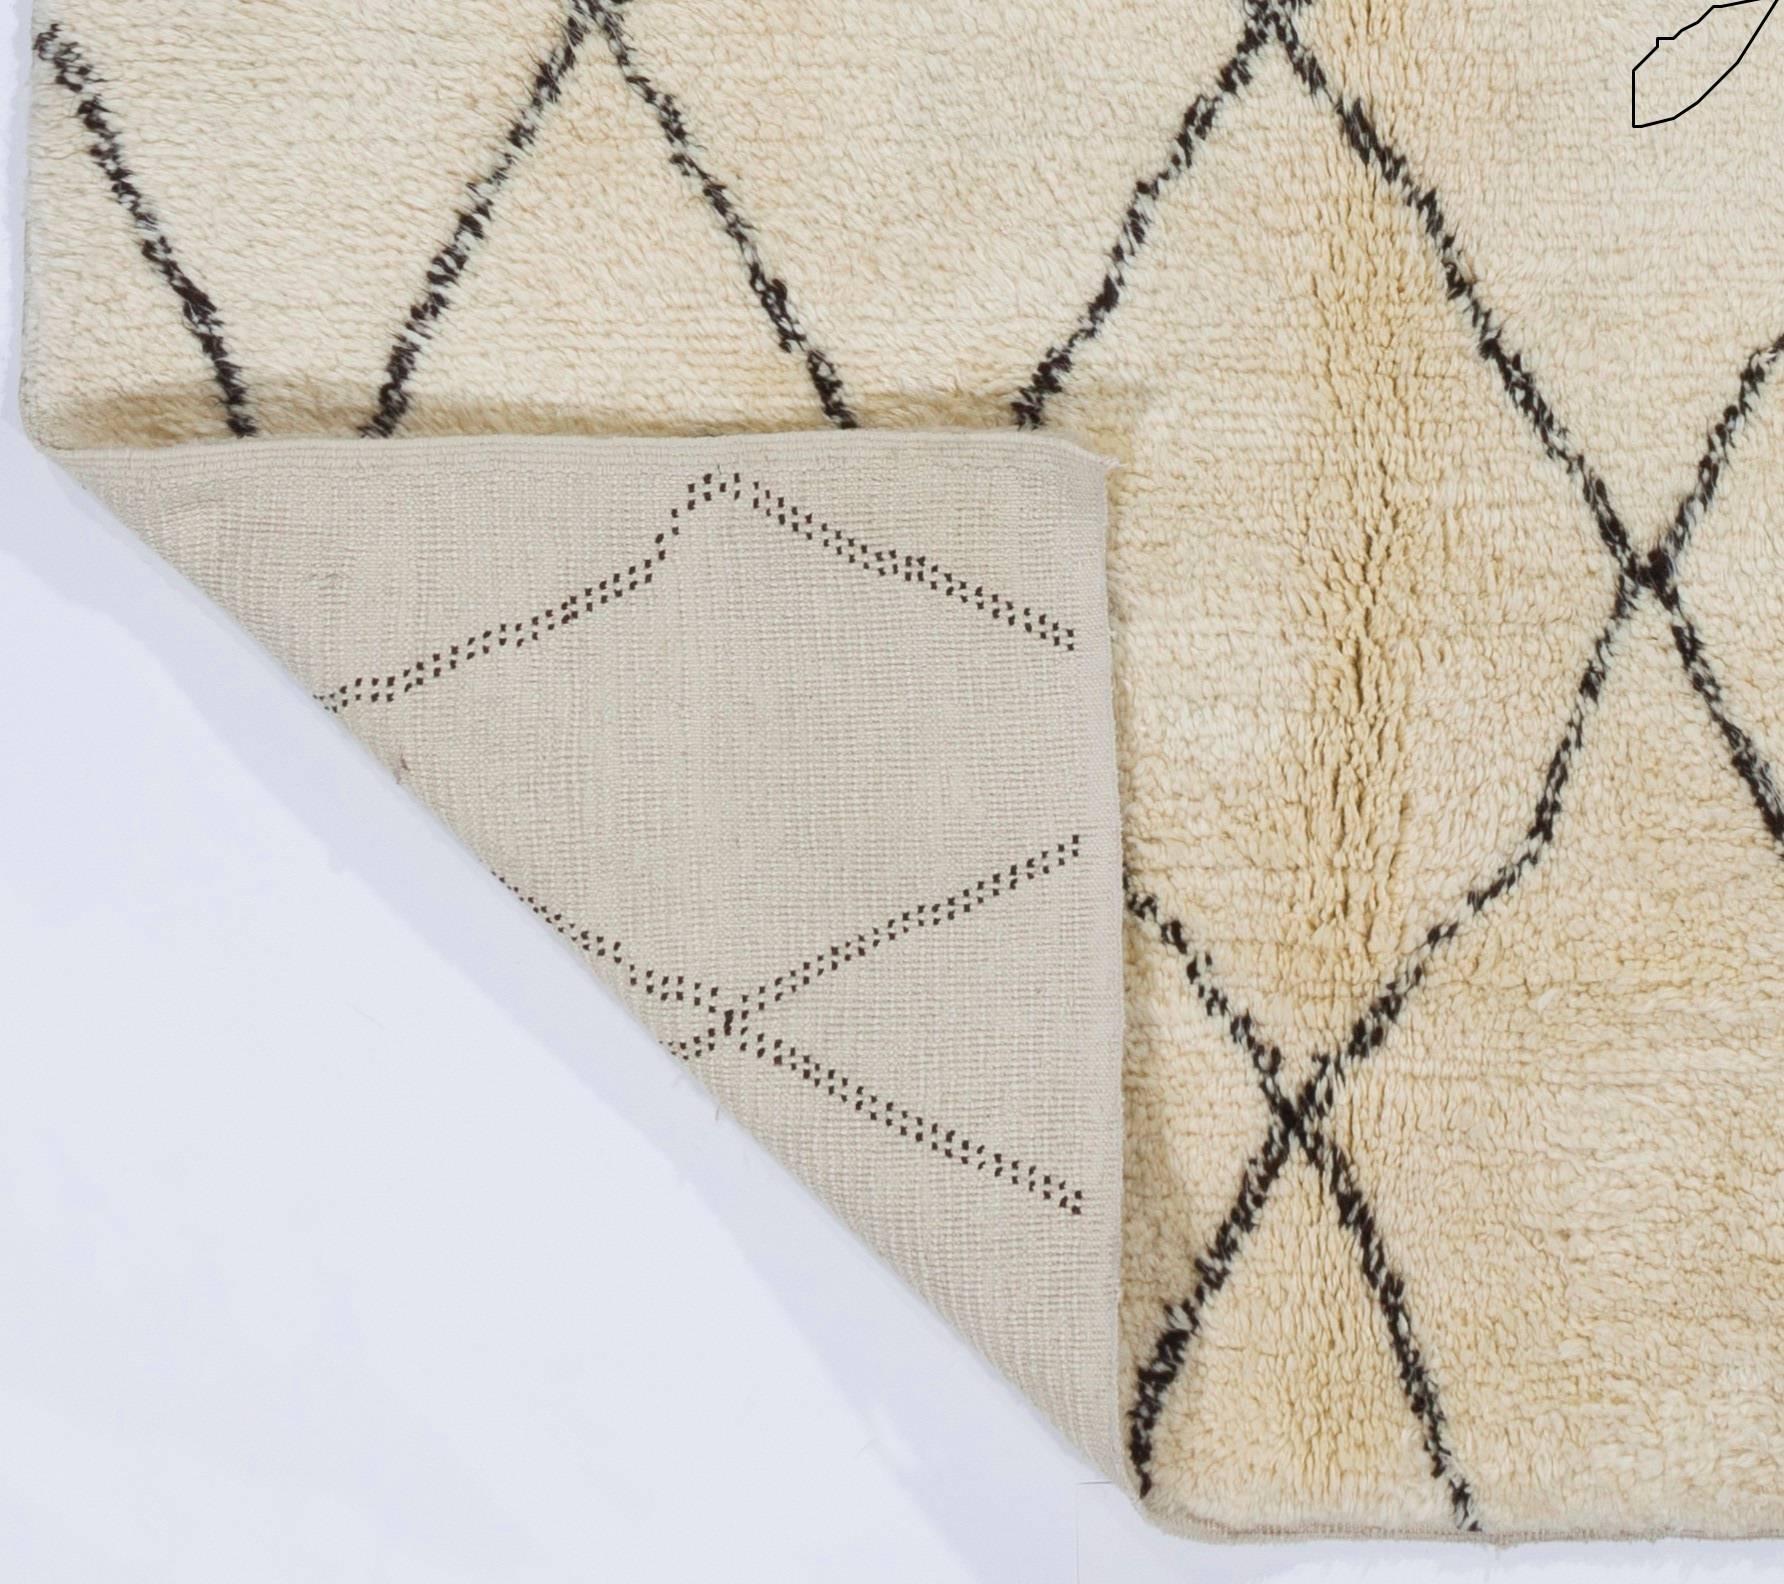 A contemporary handmade Moroccan rug with thick soft pile, made of natural undyed ivory or cream and brown wool. Available as it is or can be custom produced in any design, size, pile height and color combination requested.